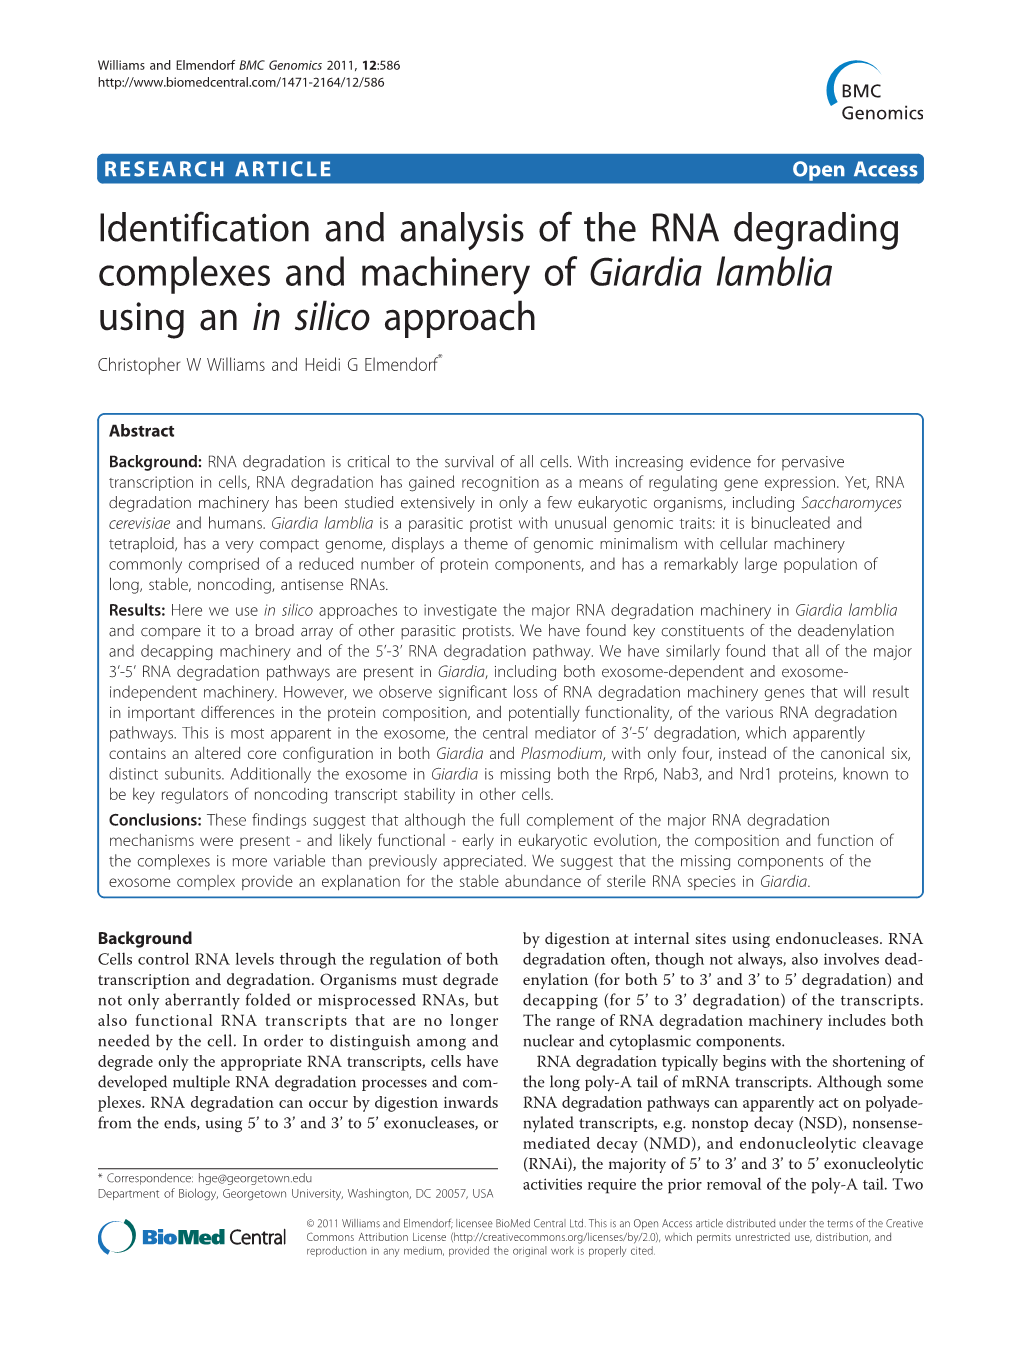 Identification and Analysis of the RNA Degrading Complexes and Machinery of Giardia Lamblia Using an in Silico Approach Christopher W Williams and Heidi G Elmendorf*